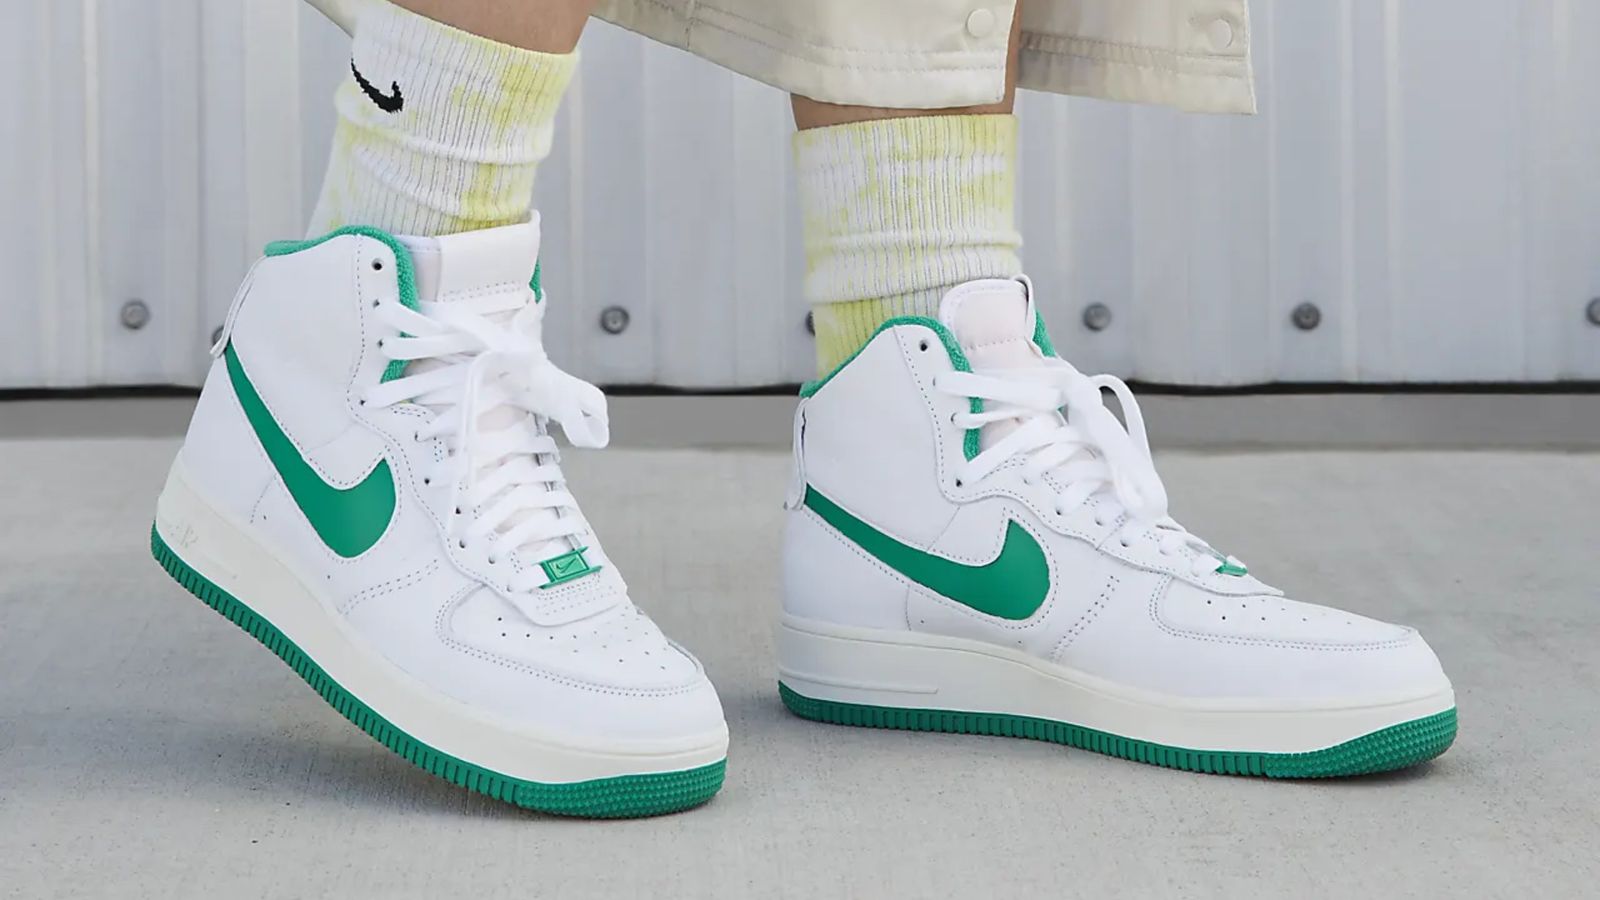 Someone in washed white and yellow Nike socks wearing white and green Air Force 1 high-tops.